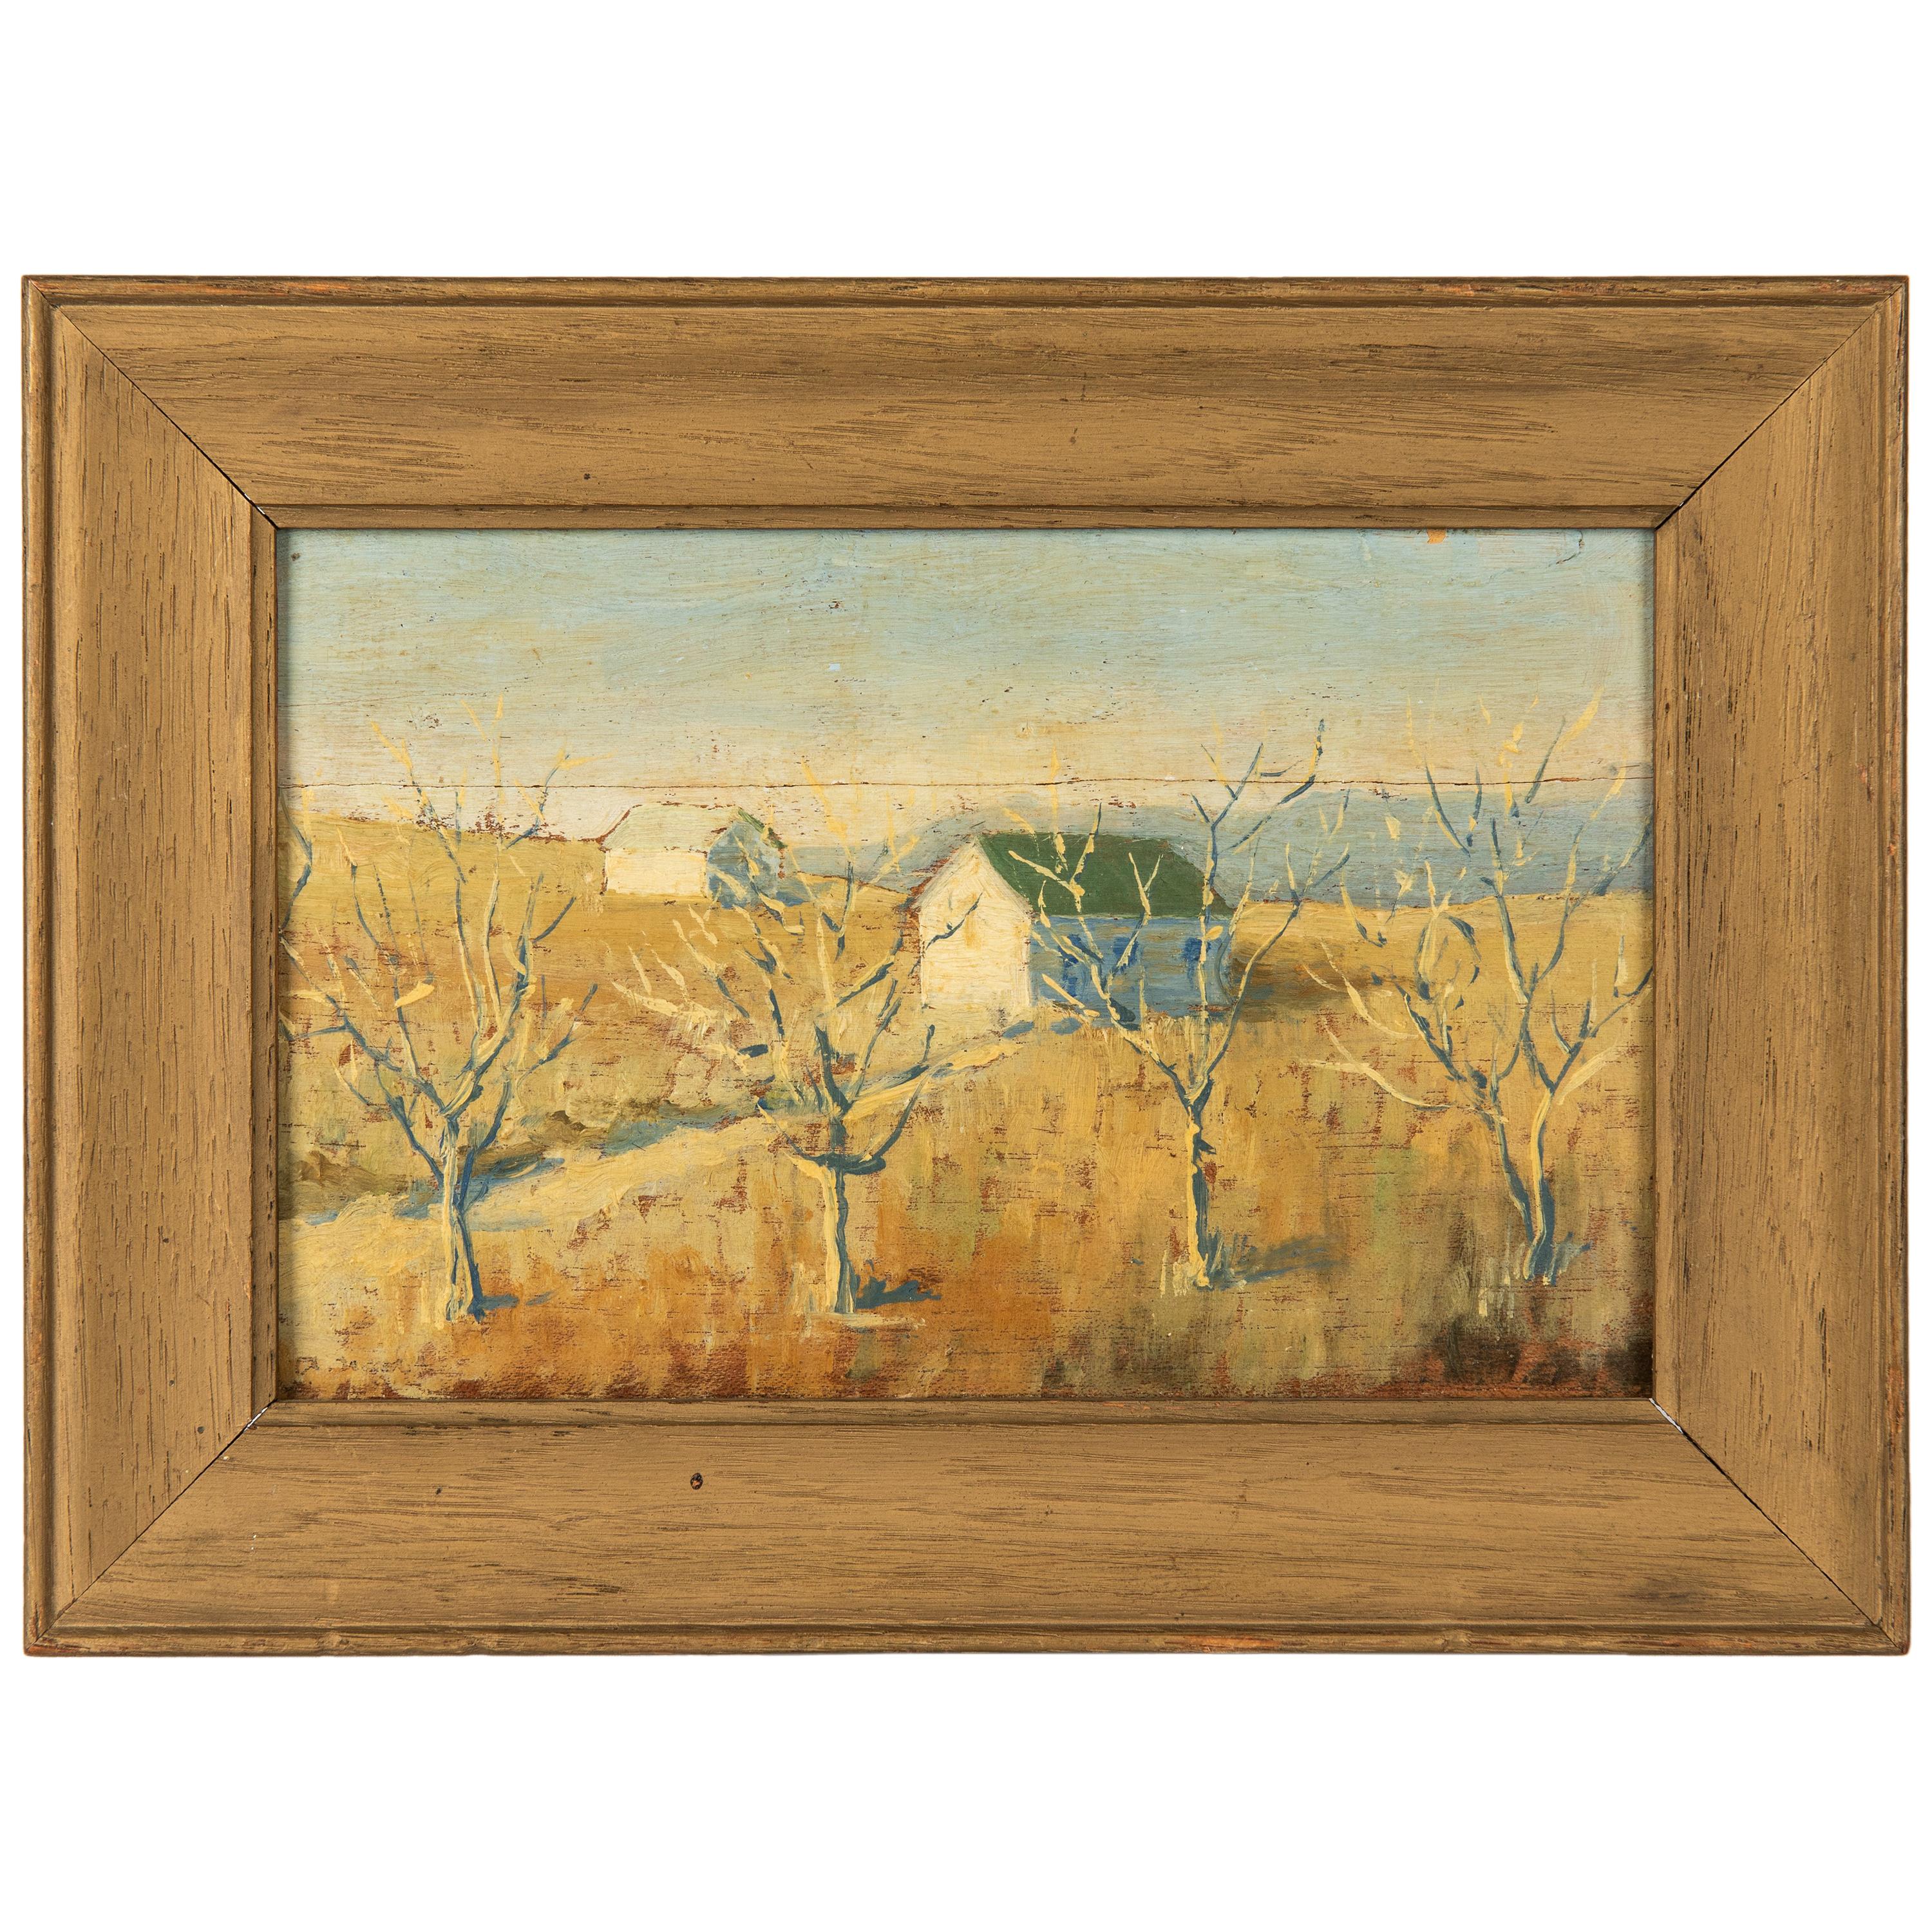 Rustic Russian Oil on Wood Painting by Leskov, Huts in Siberia